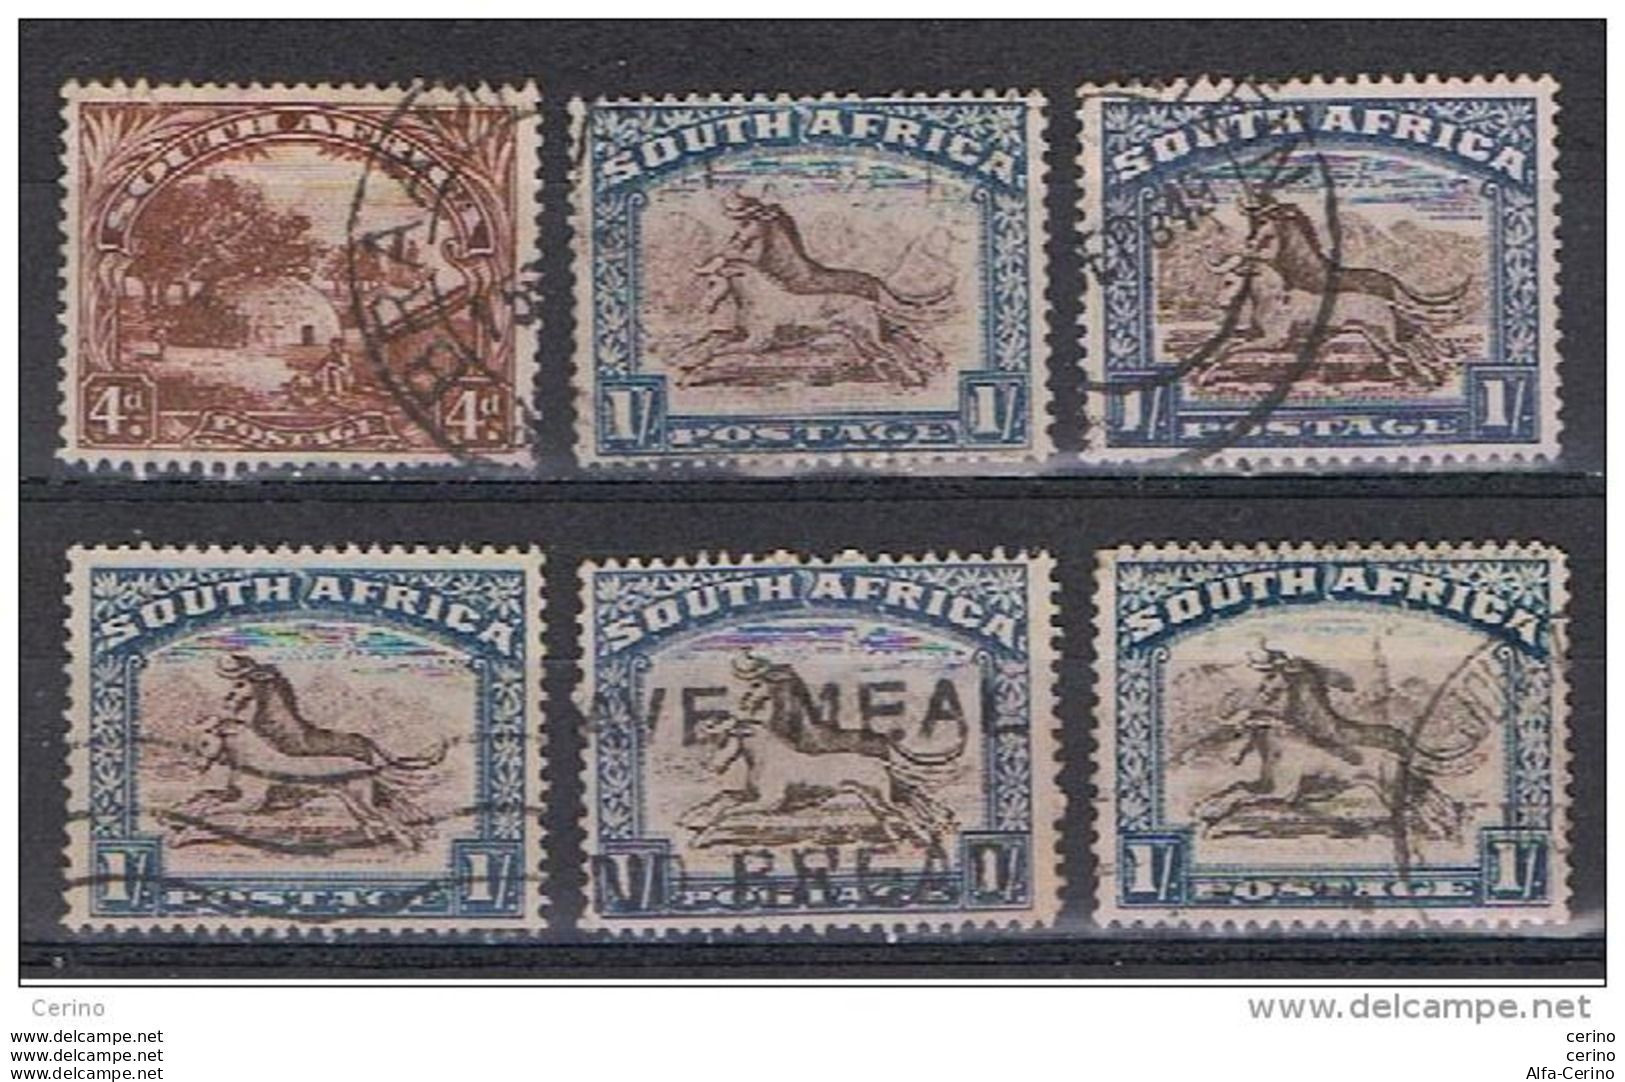 SOUTH   AFRICA:  1927/28  ORDINARY  SERIES  -  LOT  6  USED  STAMPS  -  YV/TELL. 26 + 27x5 - Usati